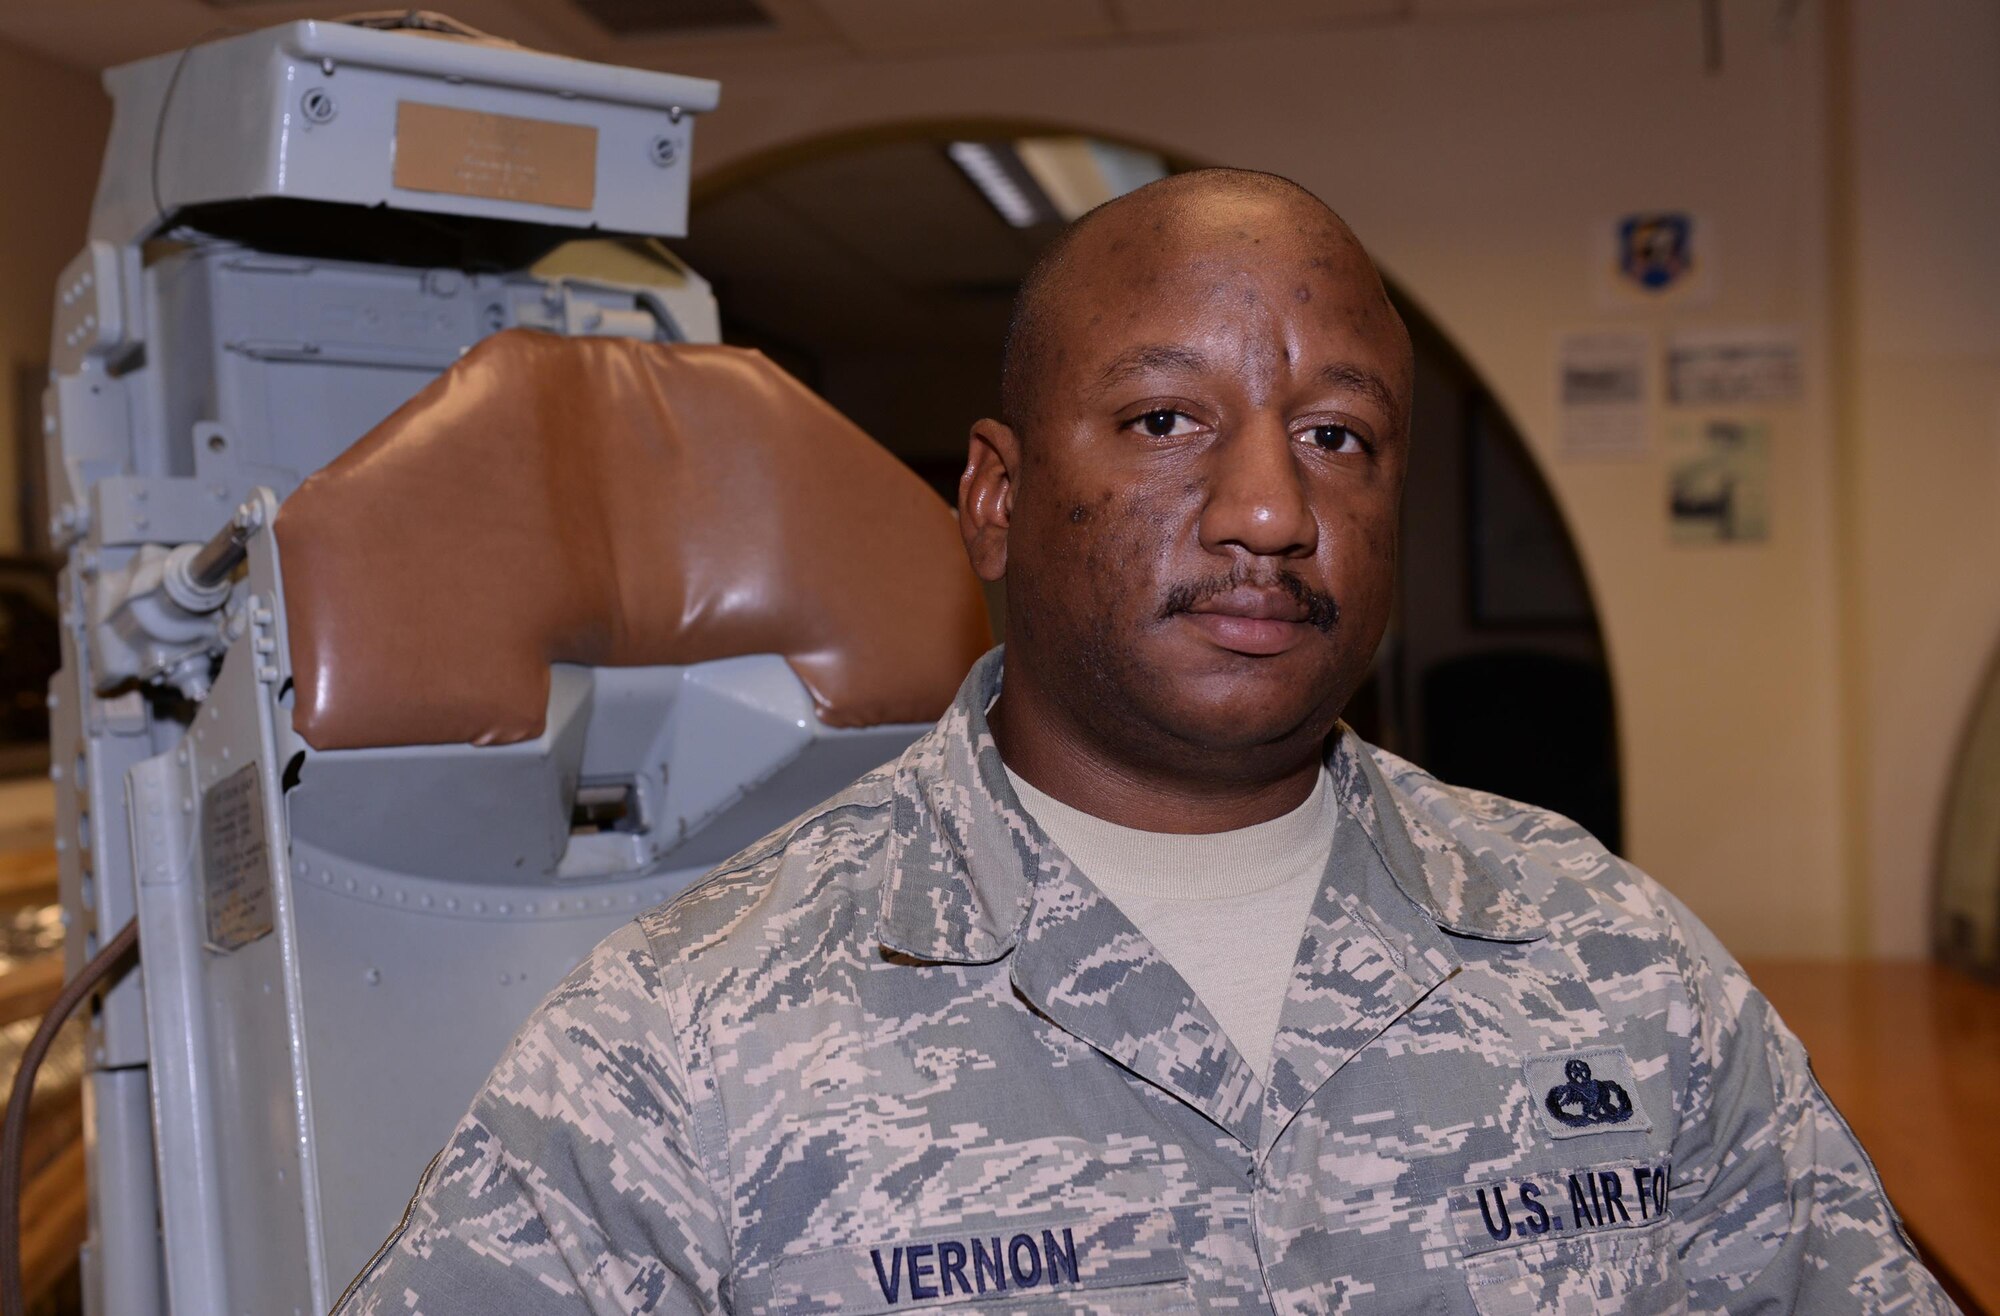 Master Sgt. Rorique Vernon, 36th Maintenance Squadron accessories flight chief, sits in a restored B-52D Stratofortress pilot’s seat Jan. 7, 2016, at the heritage hall museum on Andersen Air Force Base, Guam. Vernon holds a volunteer position as the Wing historical property custodian and manages the museums inventory of artifacts. (U.S. Air Force photo/Airman 1st Class Jacob Skovo)